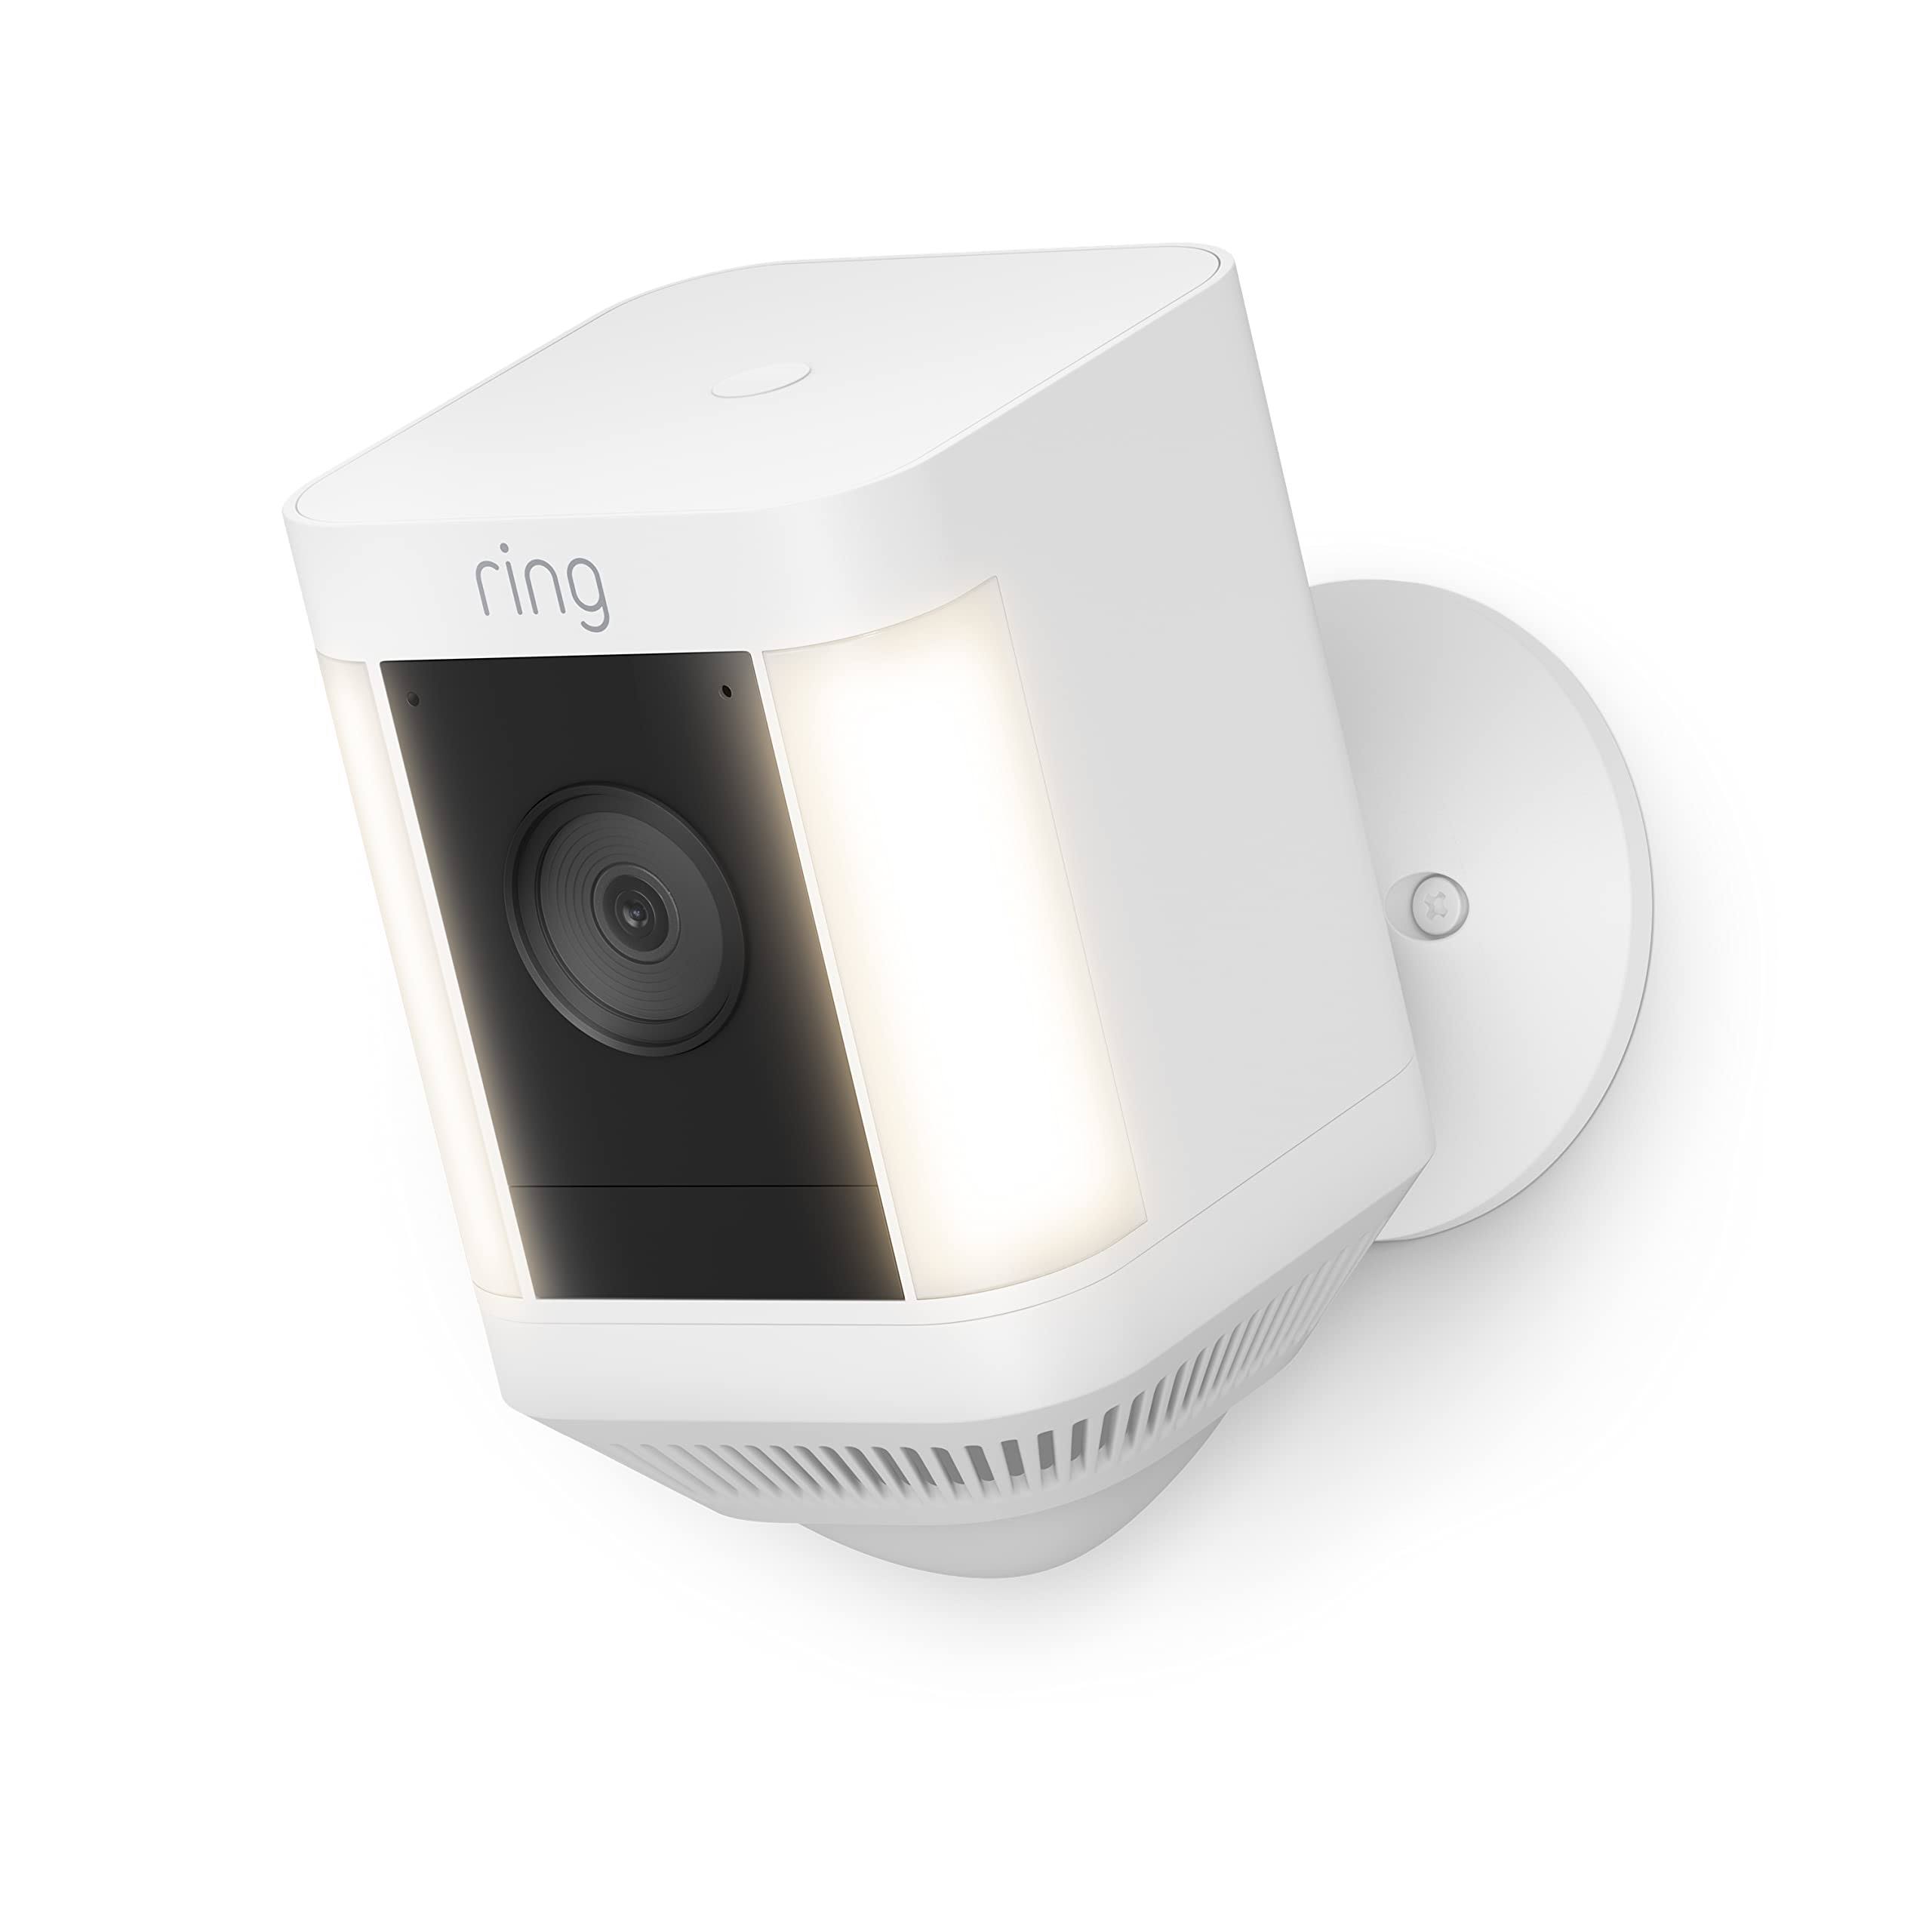 Ring Spotlight Cam Plus Battery Two Way Talk Color Night Vision and Security Siren